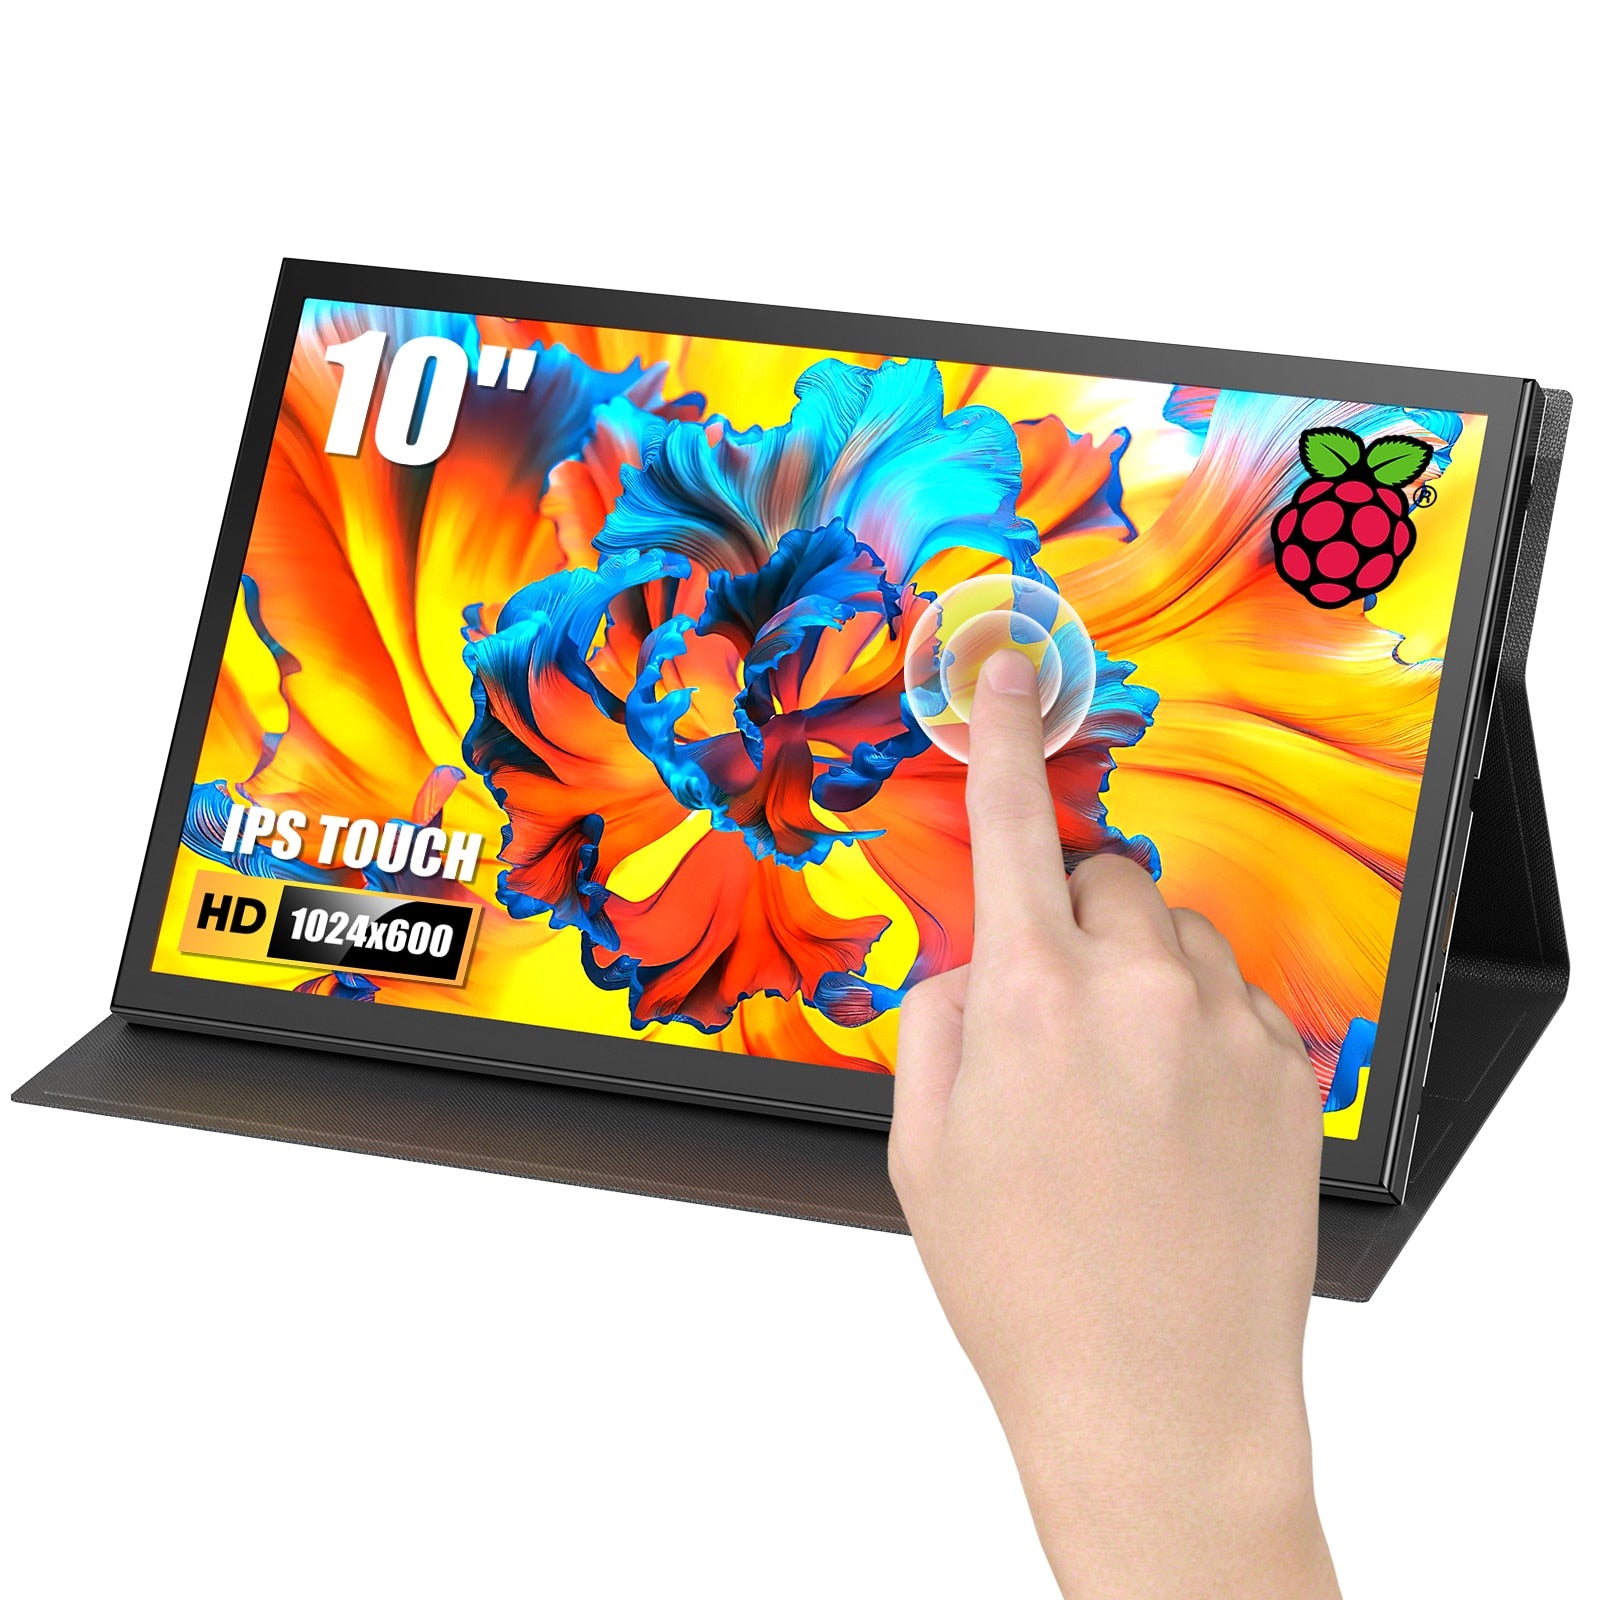 Miktver Driver Free 10.1 Inch Capacitive Touch Screen 1024*600 Portable HDMI Gaming Monitor 3ms Response Compatible Raspberry Pi